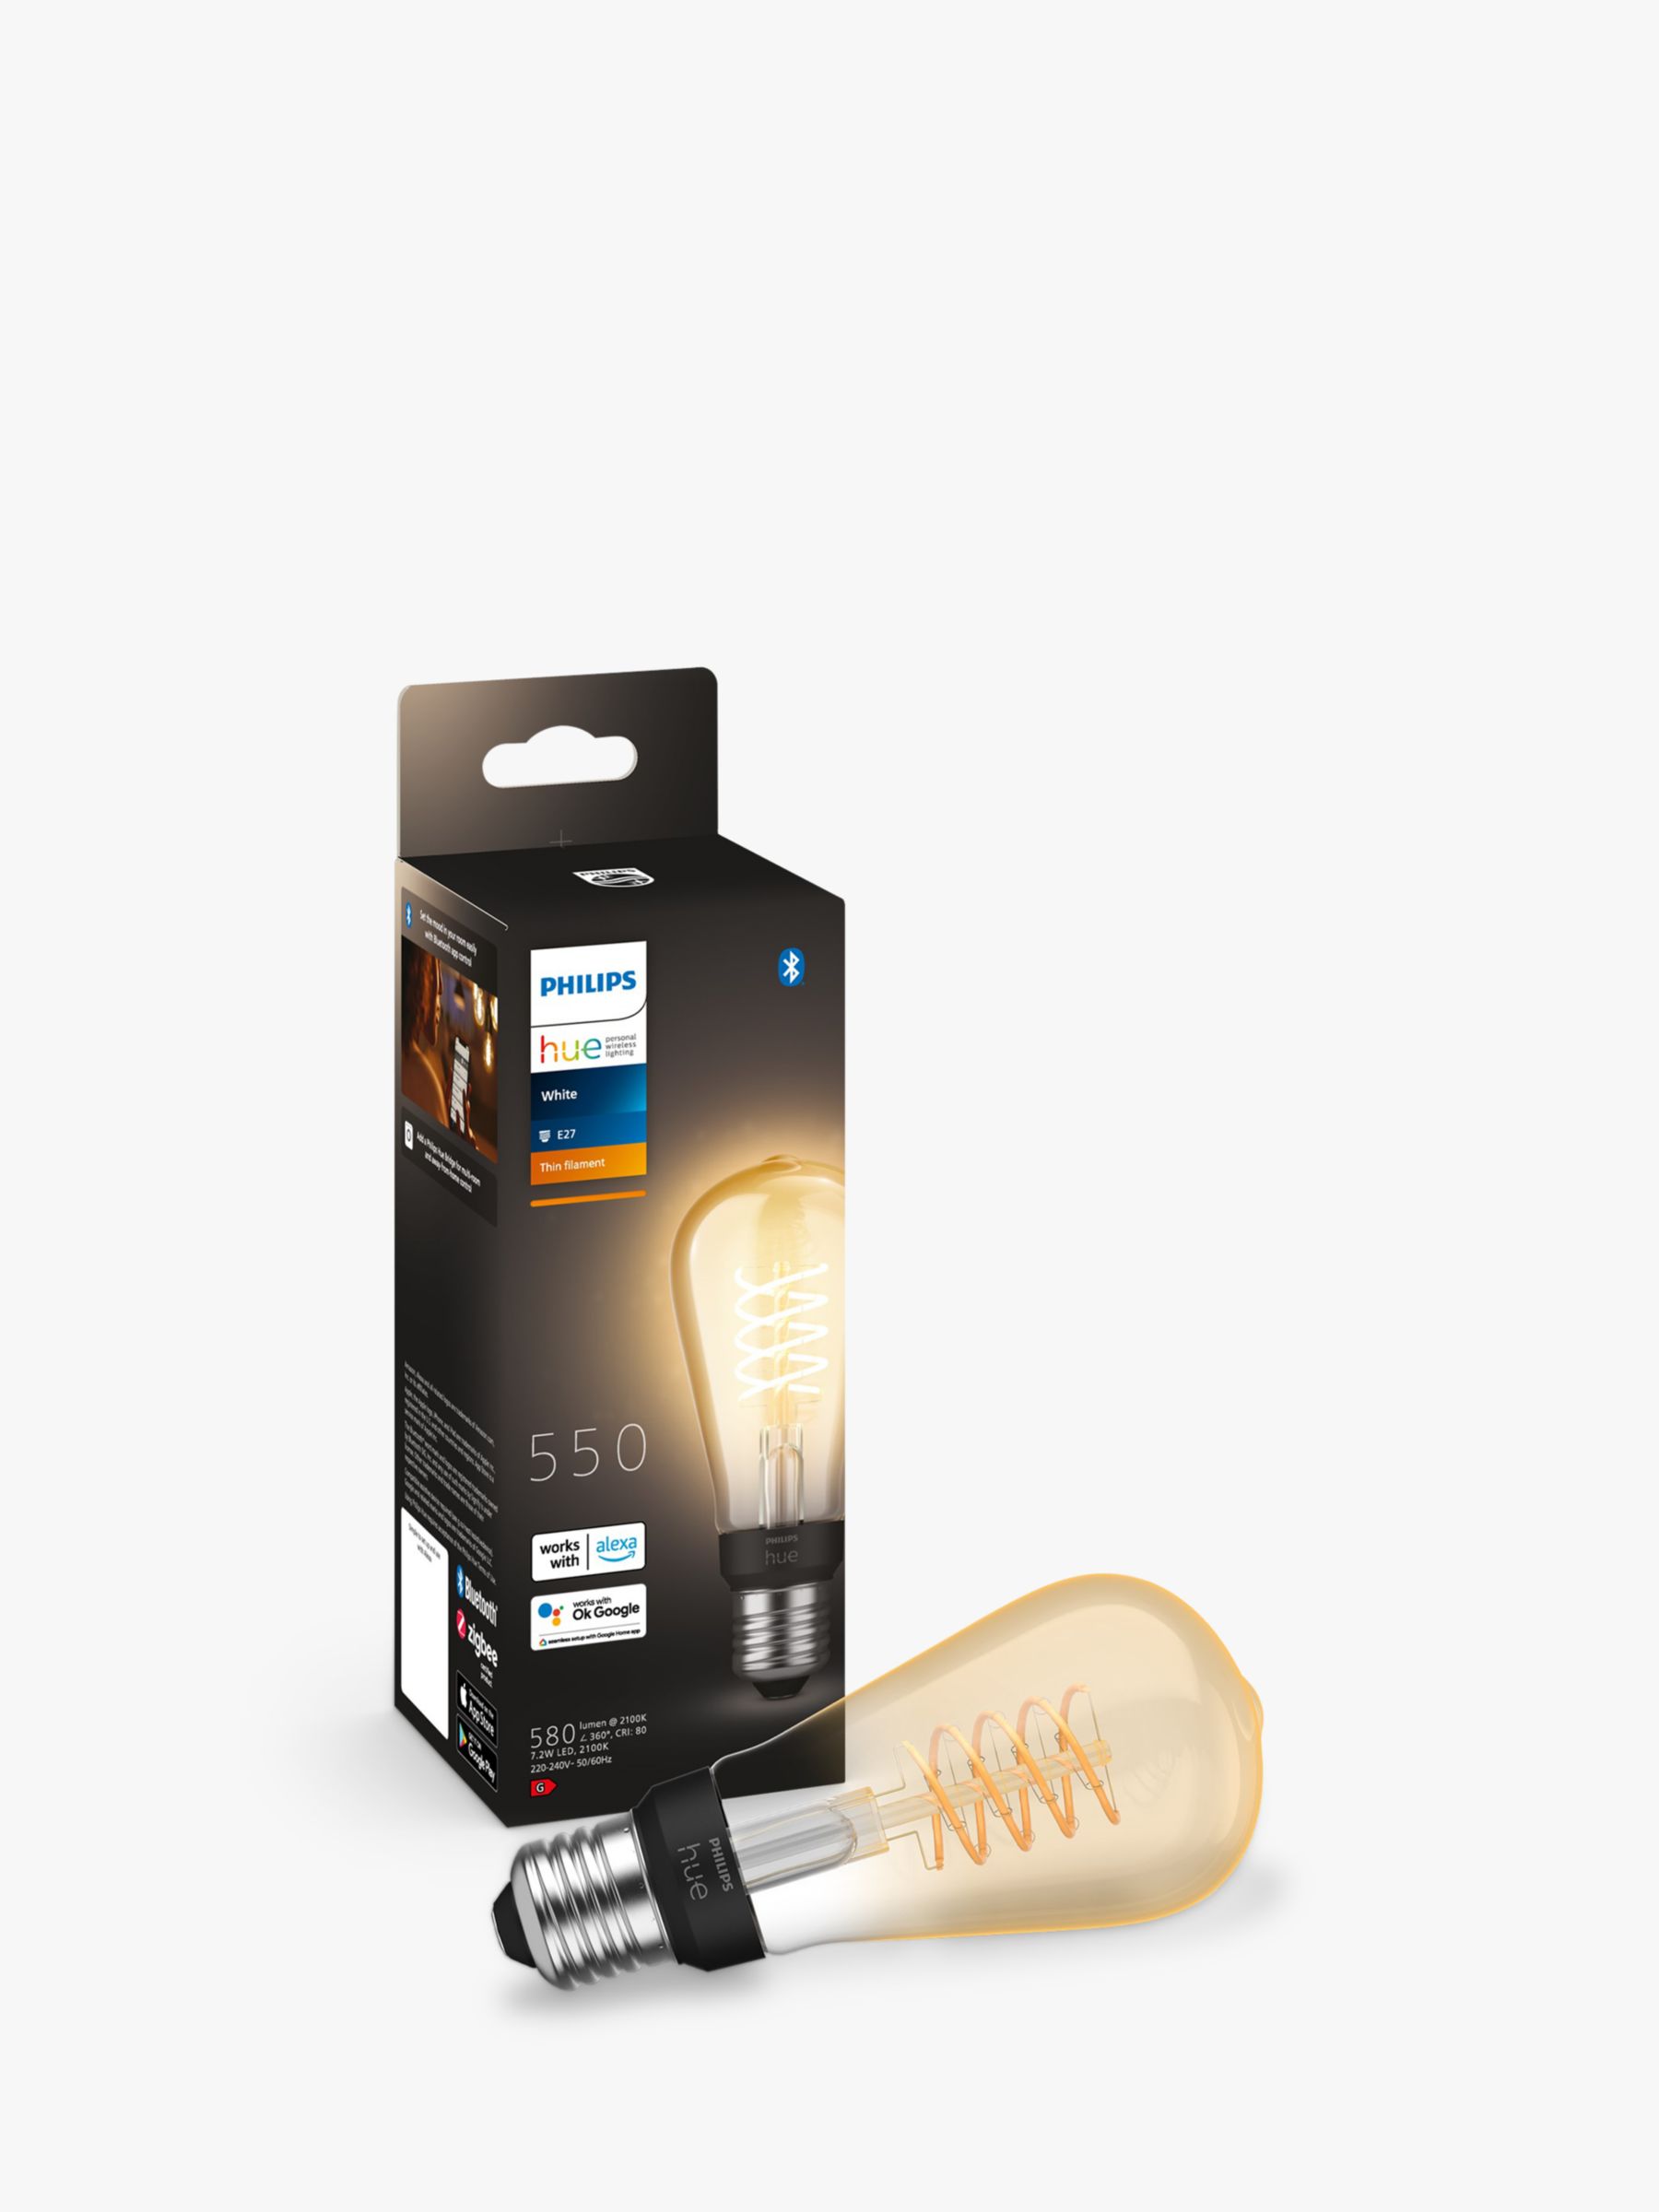 Photo of Philips hue wireless lighting white 7w es led smart dimmable filament bulb st64 e27